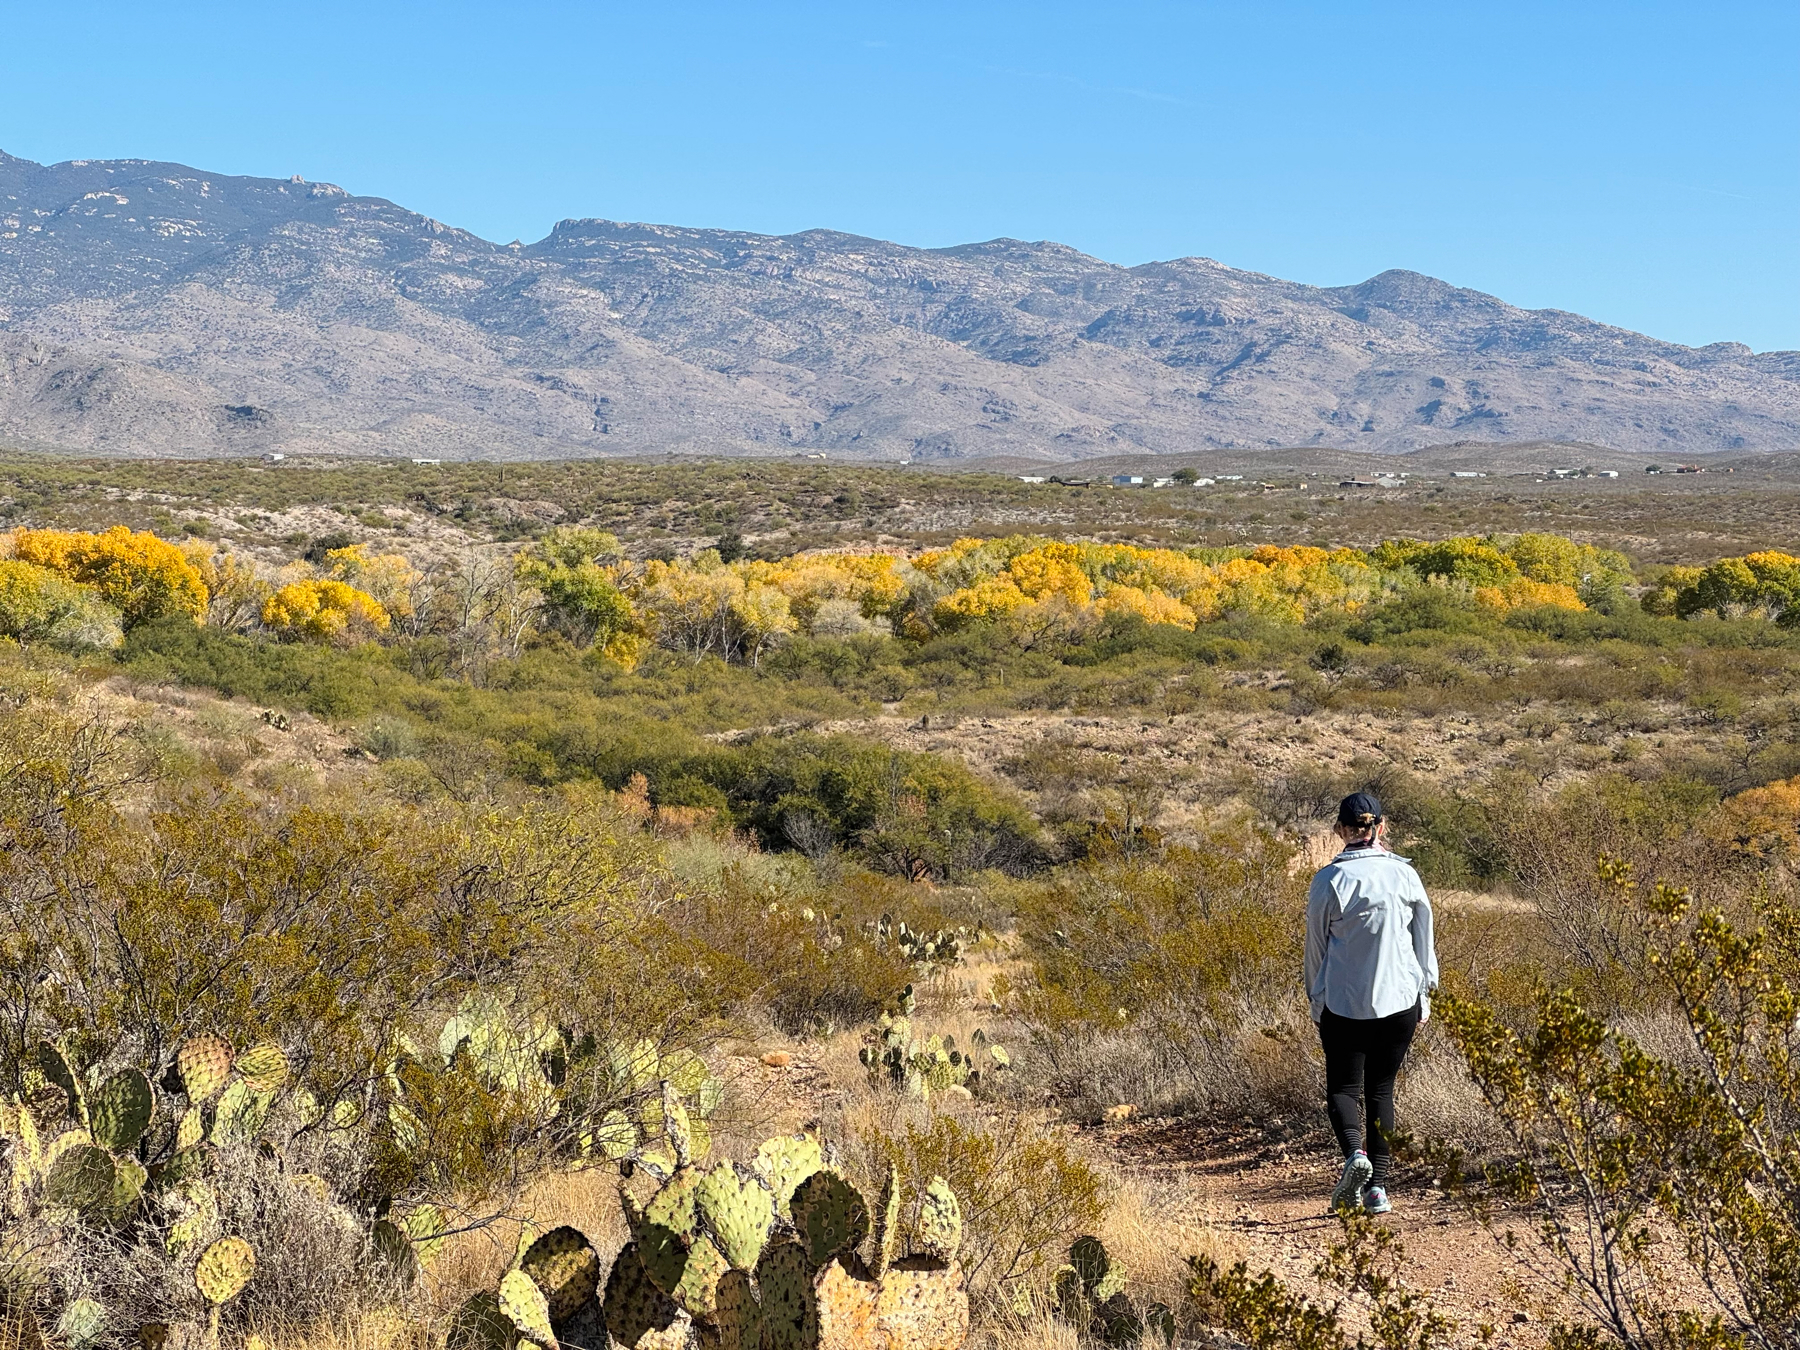 Person walking on a trail through a desert landscape with cacti in the foreground and mountains in the background, under a clear blue sky.